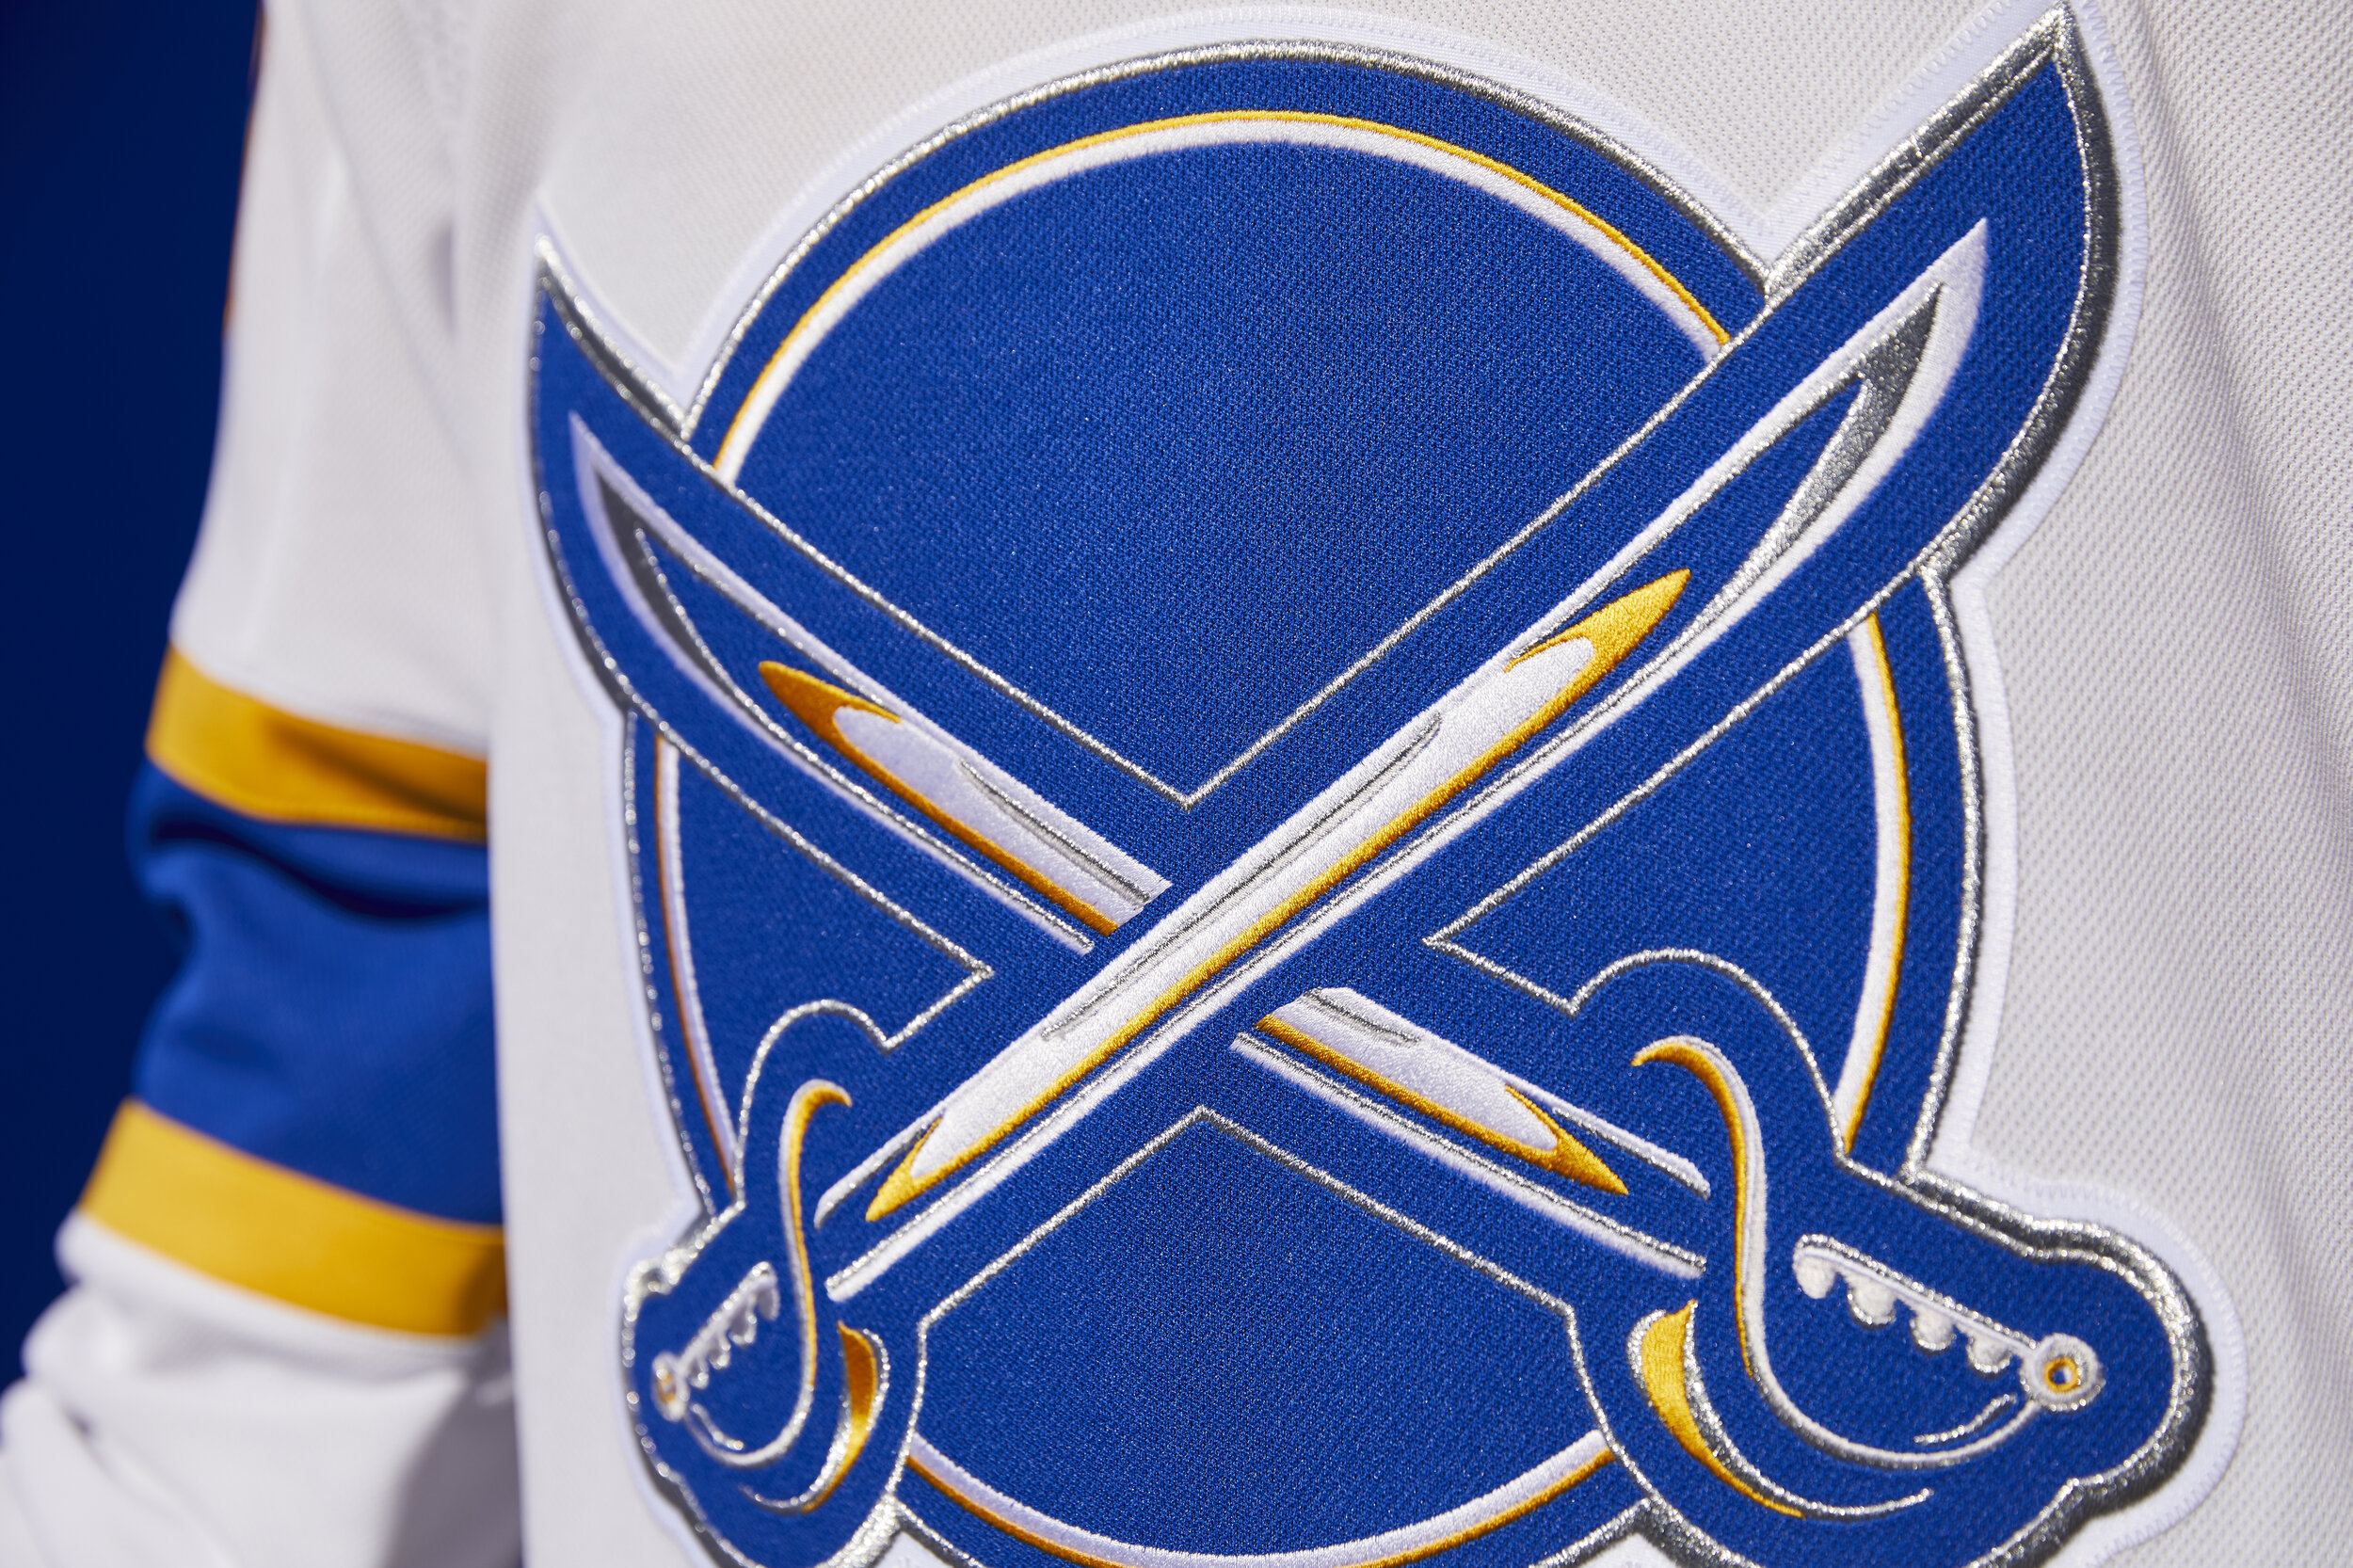 Buffalo Sabres - Our #ReverseRetro jersey is now available at the Sabres  Store! Learn more: sabres.com/reverseretro